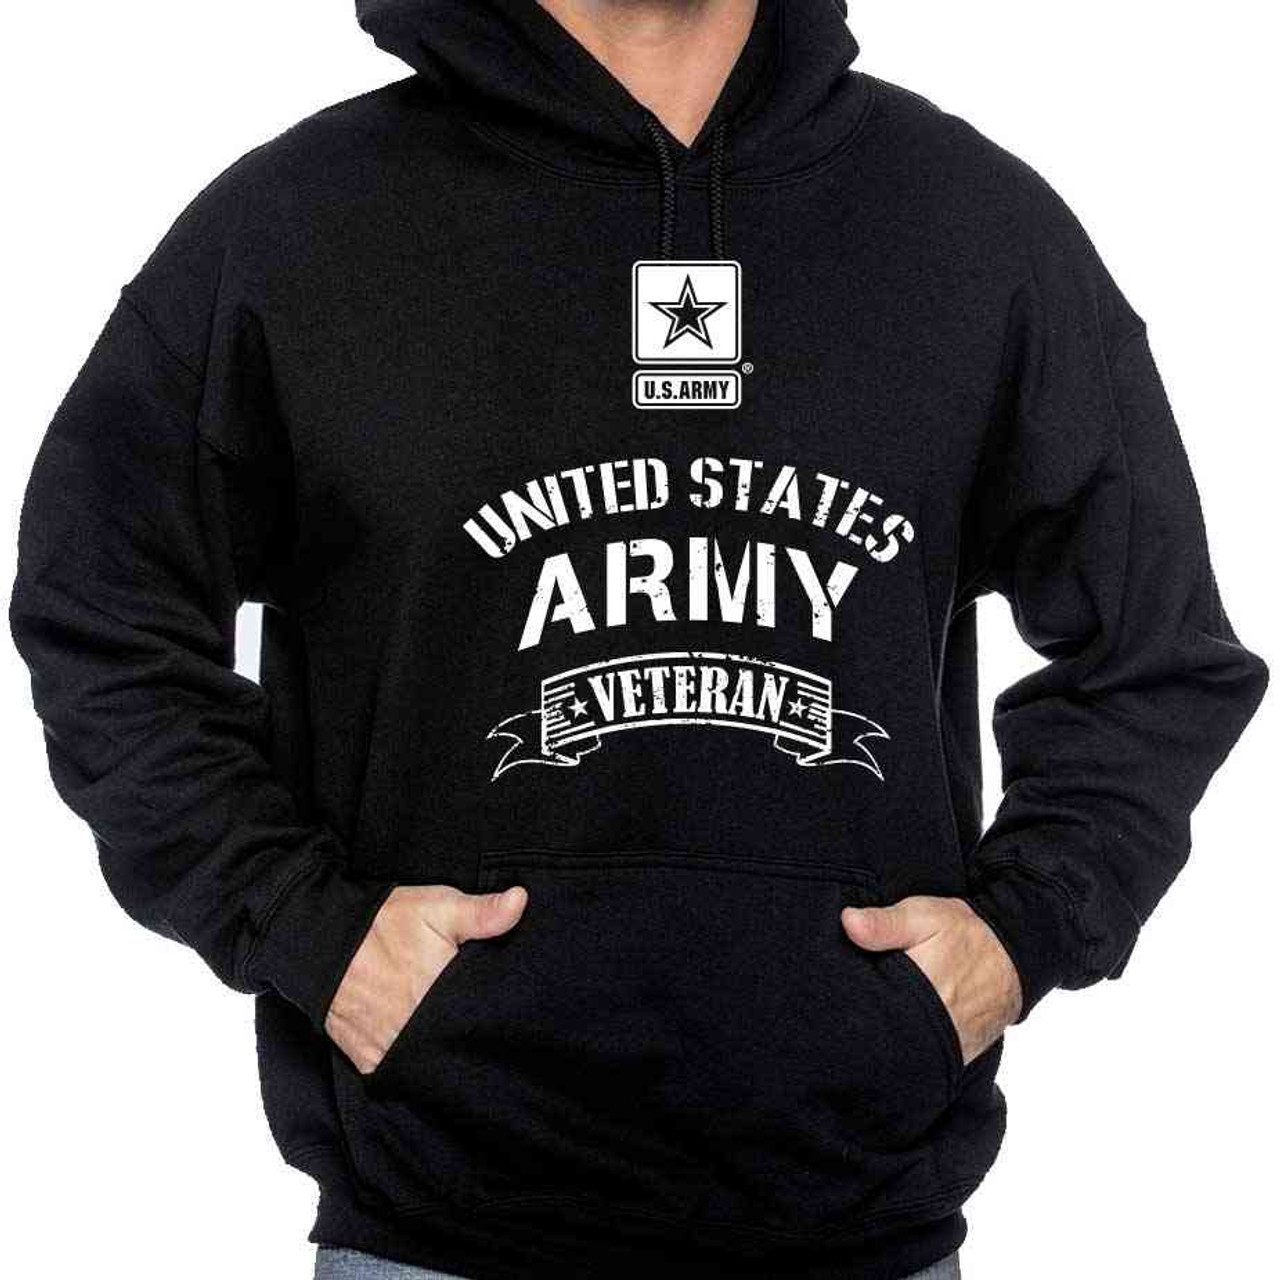 Officially Licensed US Army Veteran Hooded Sweatshirt with Army Logo